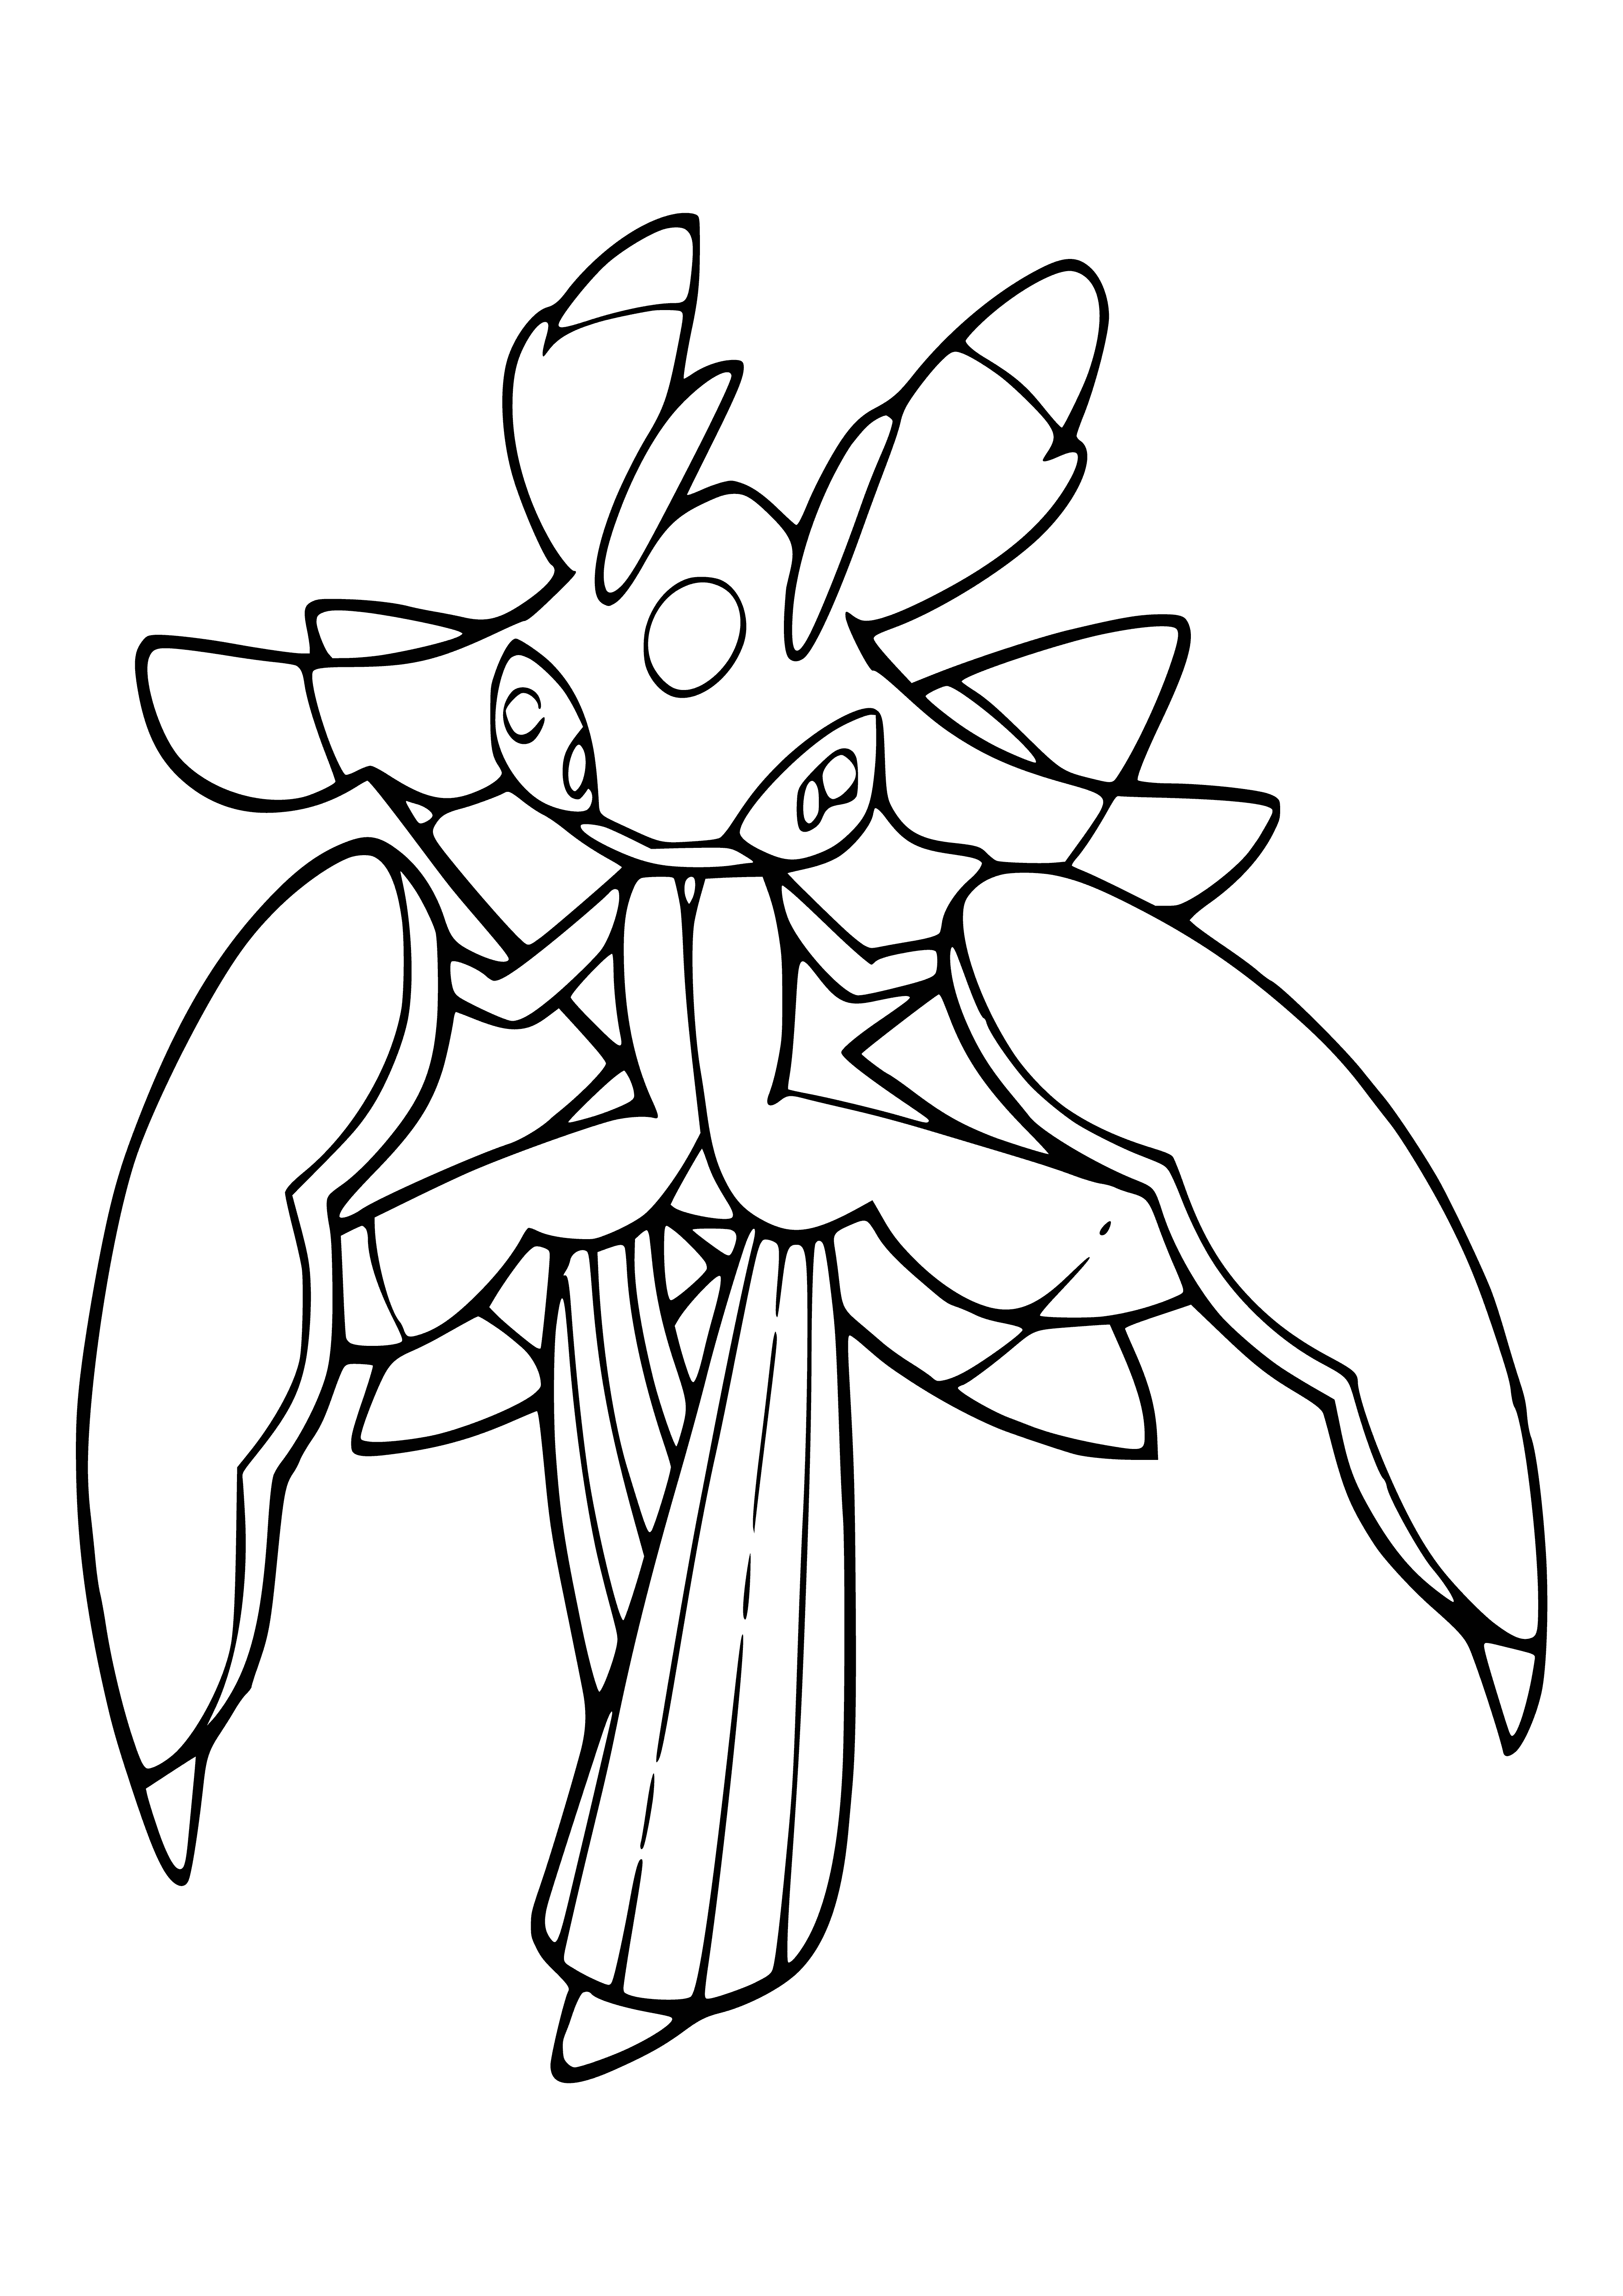 coloring page: Large green Pokemon stands in a field of flowers with a red head & crest; red eyes, mouth & stripes; & red arms & legs with 3 "fingers" & 3 "toes". Long red tail with a red tip.